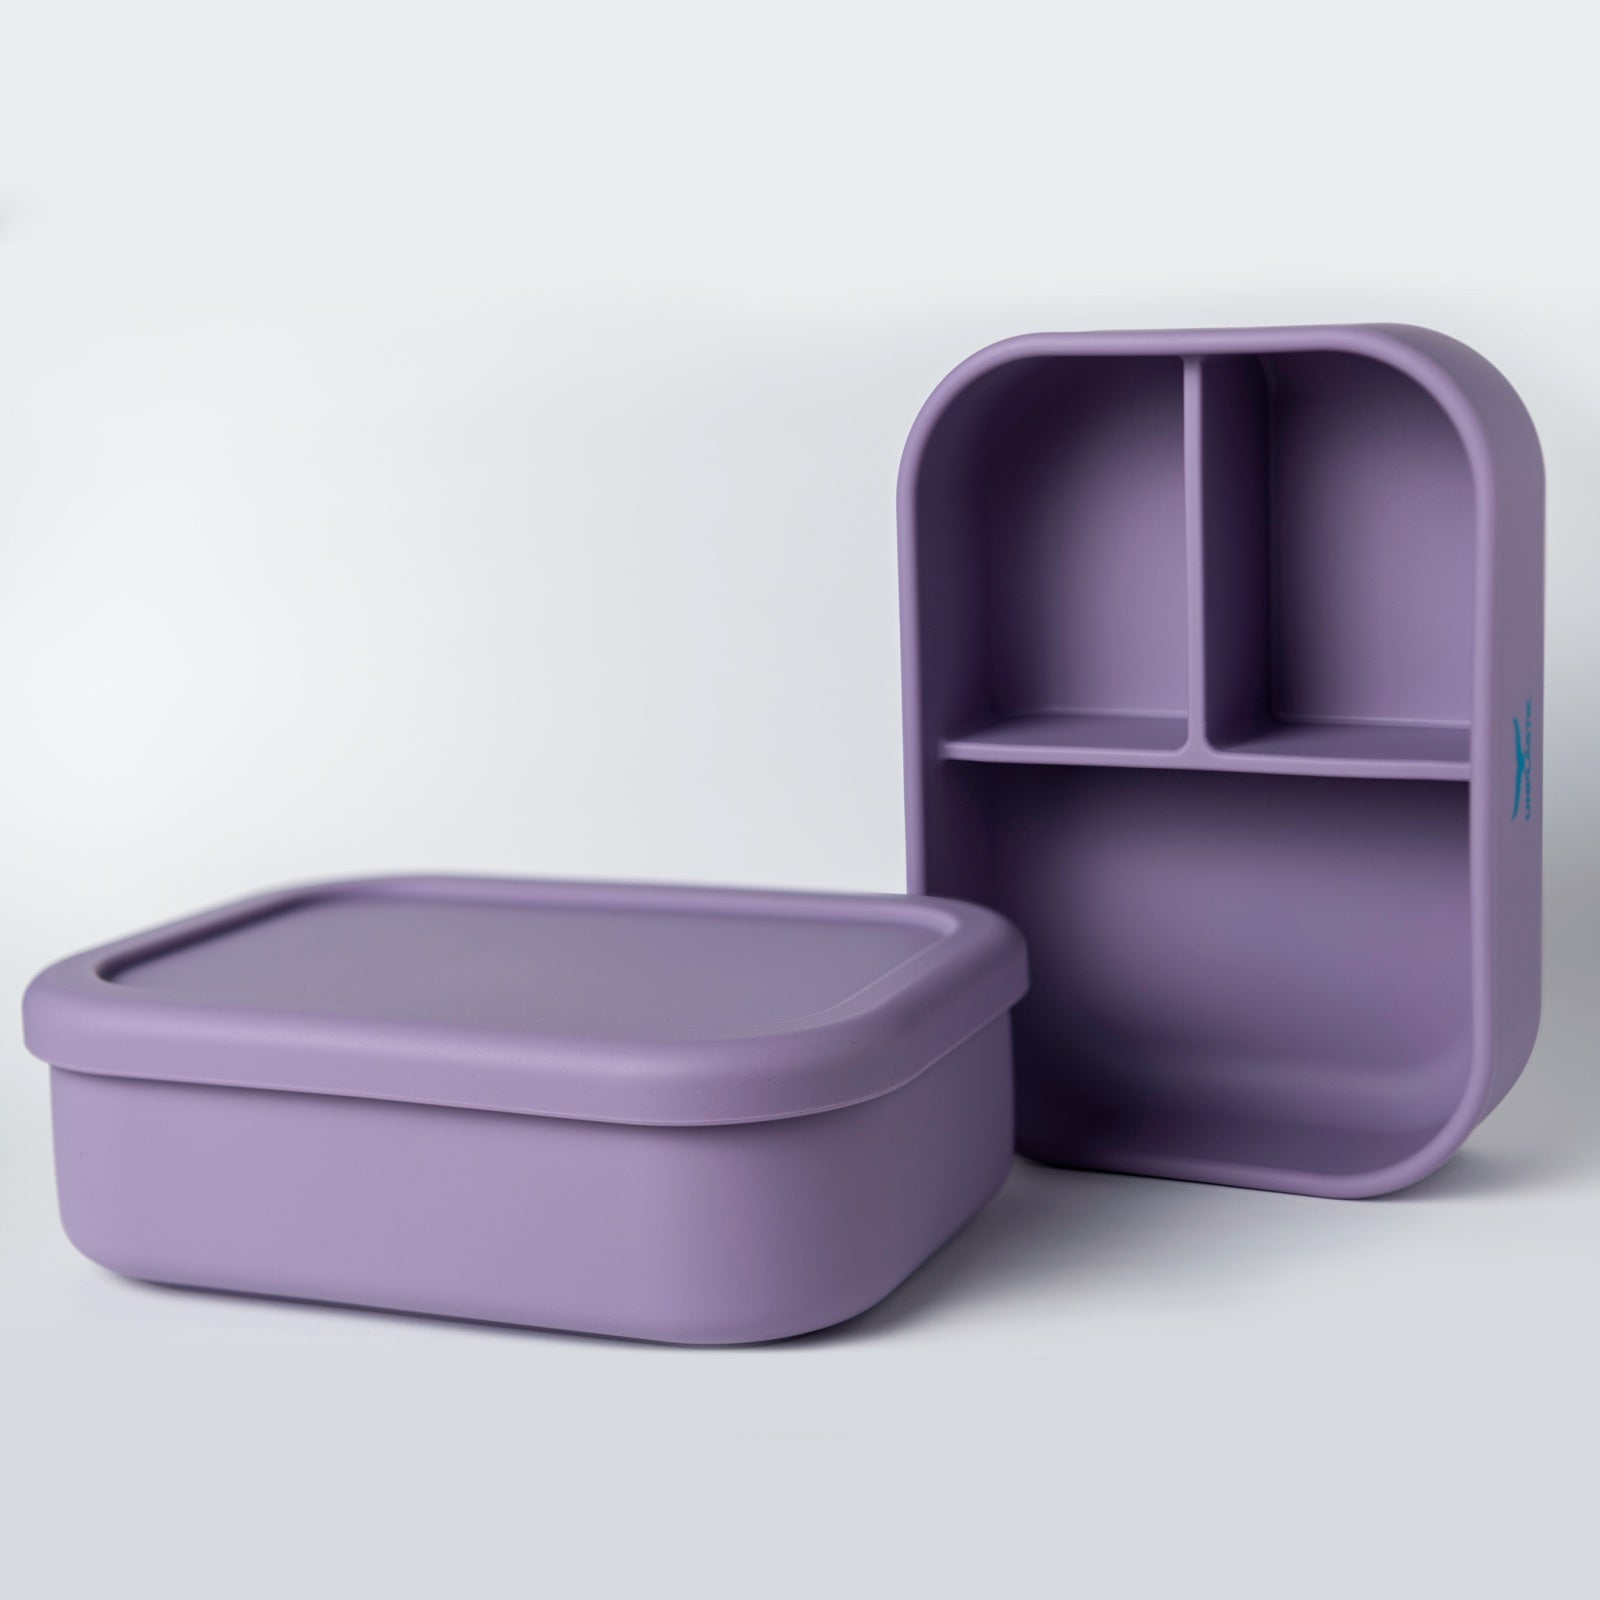 3 Compartments Purple by Unplastik | Get it at The Green Collective